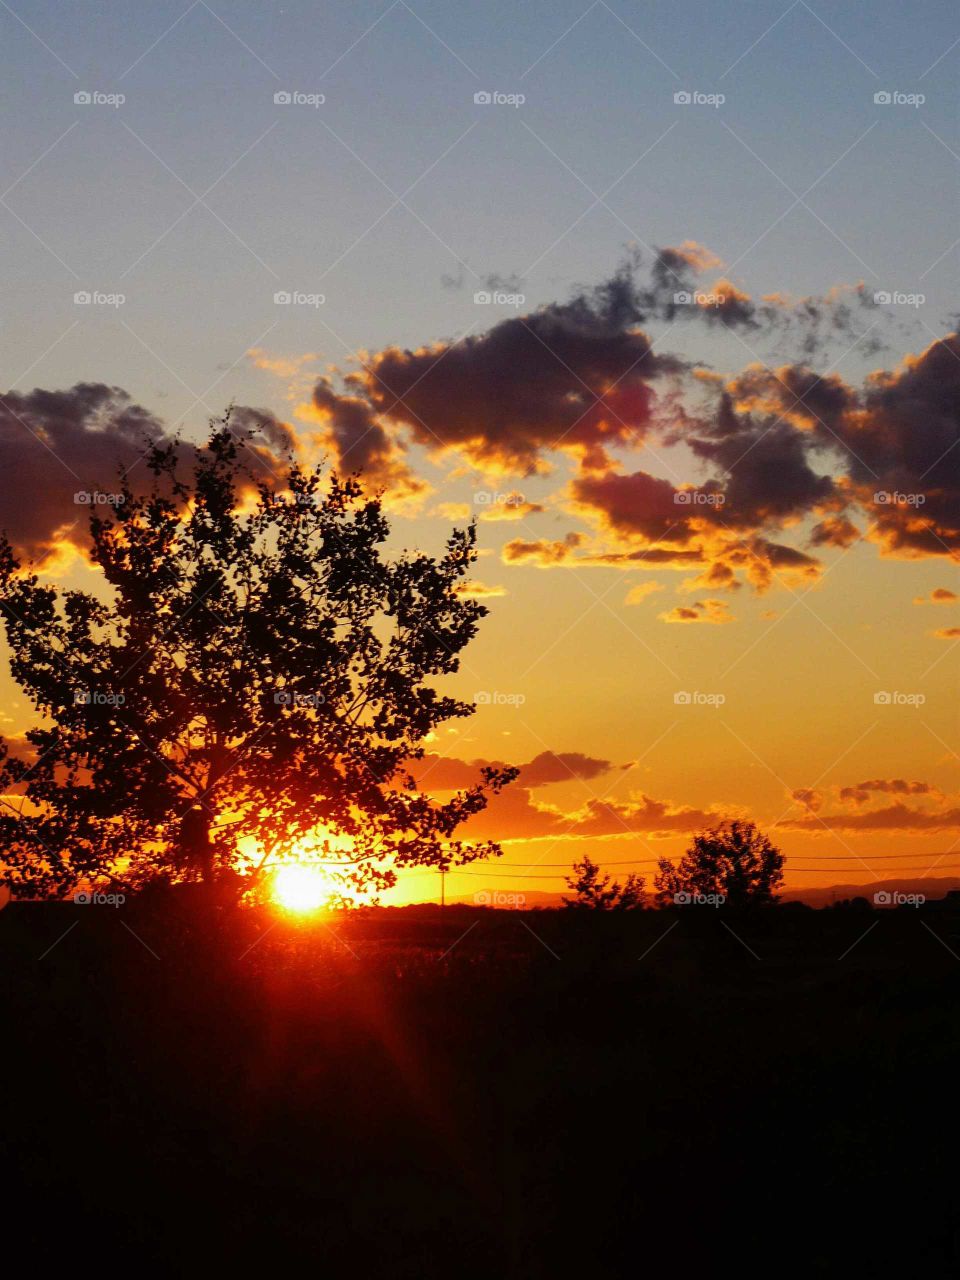 Sunset with trees silhouetted